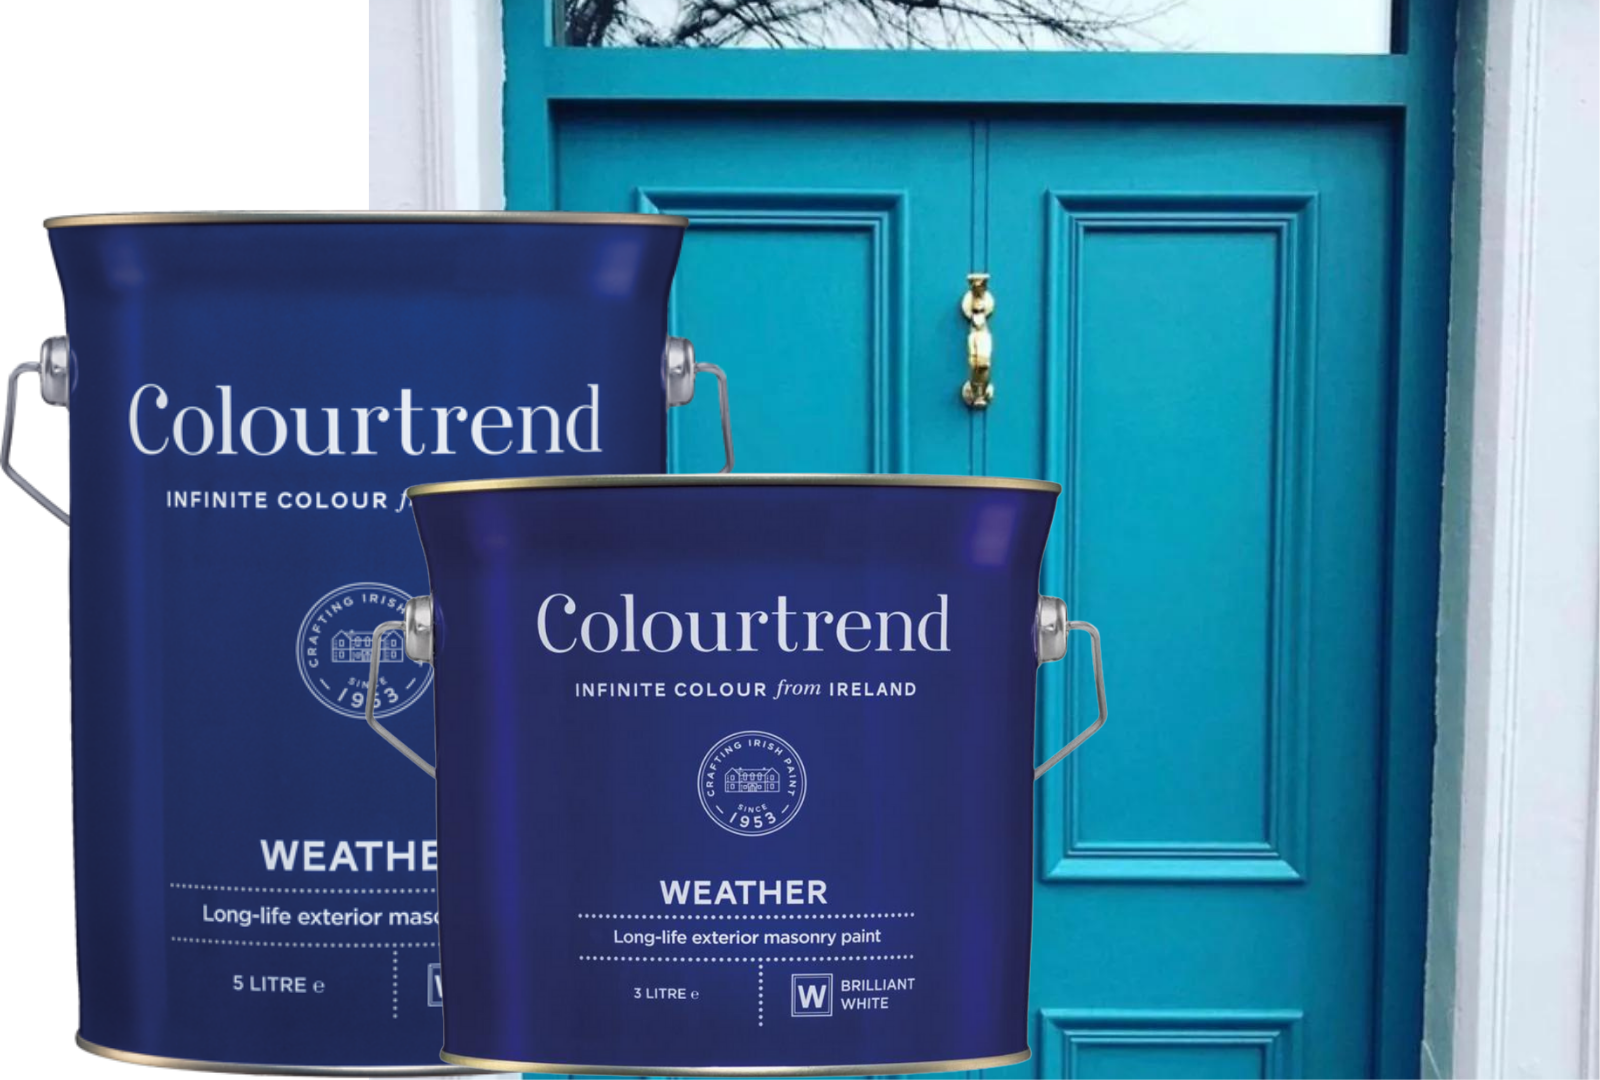 Colourtrend Petrol | Same Day Dublin Delivery by Weirs of Baggot St